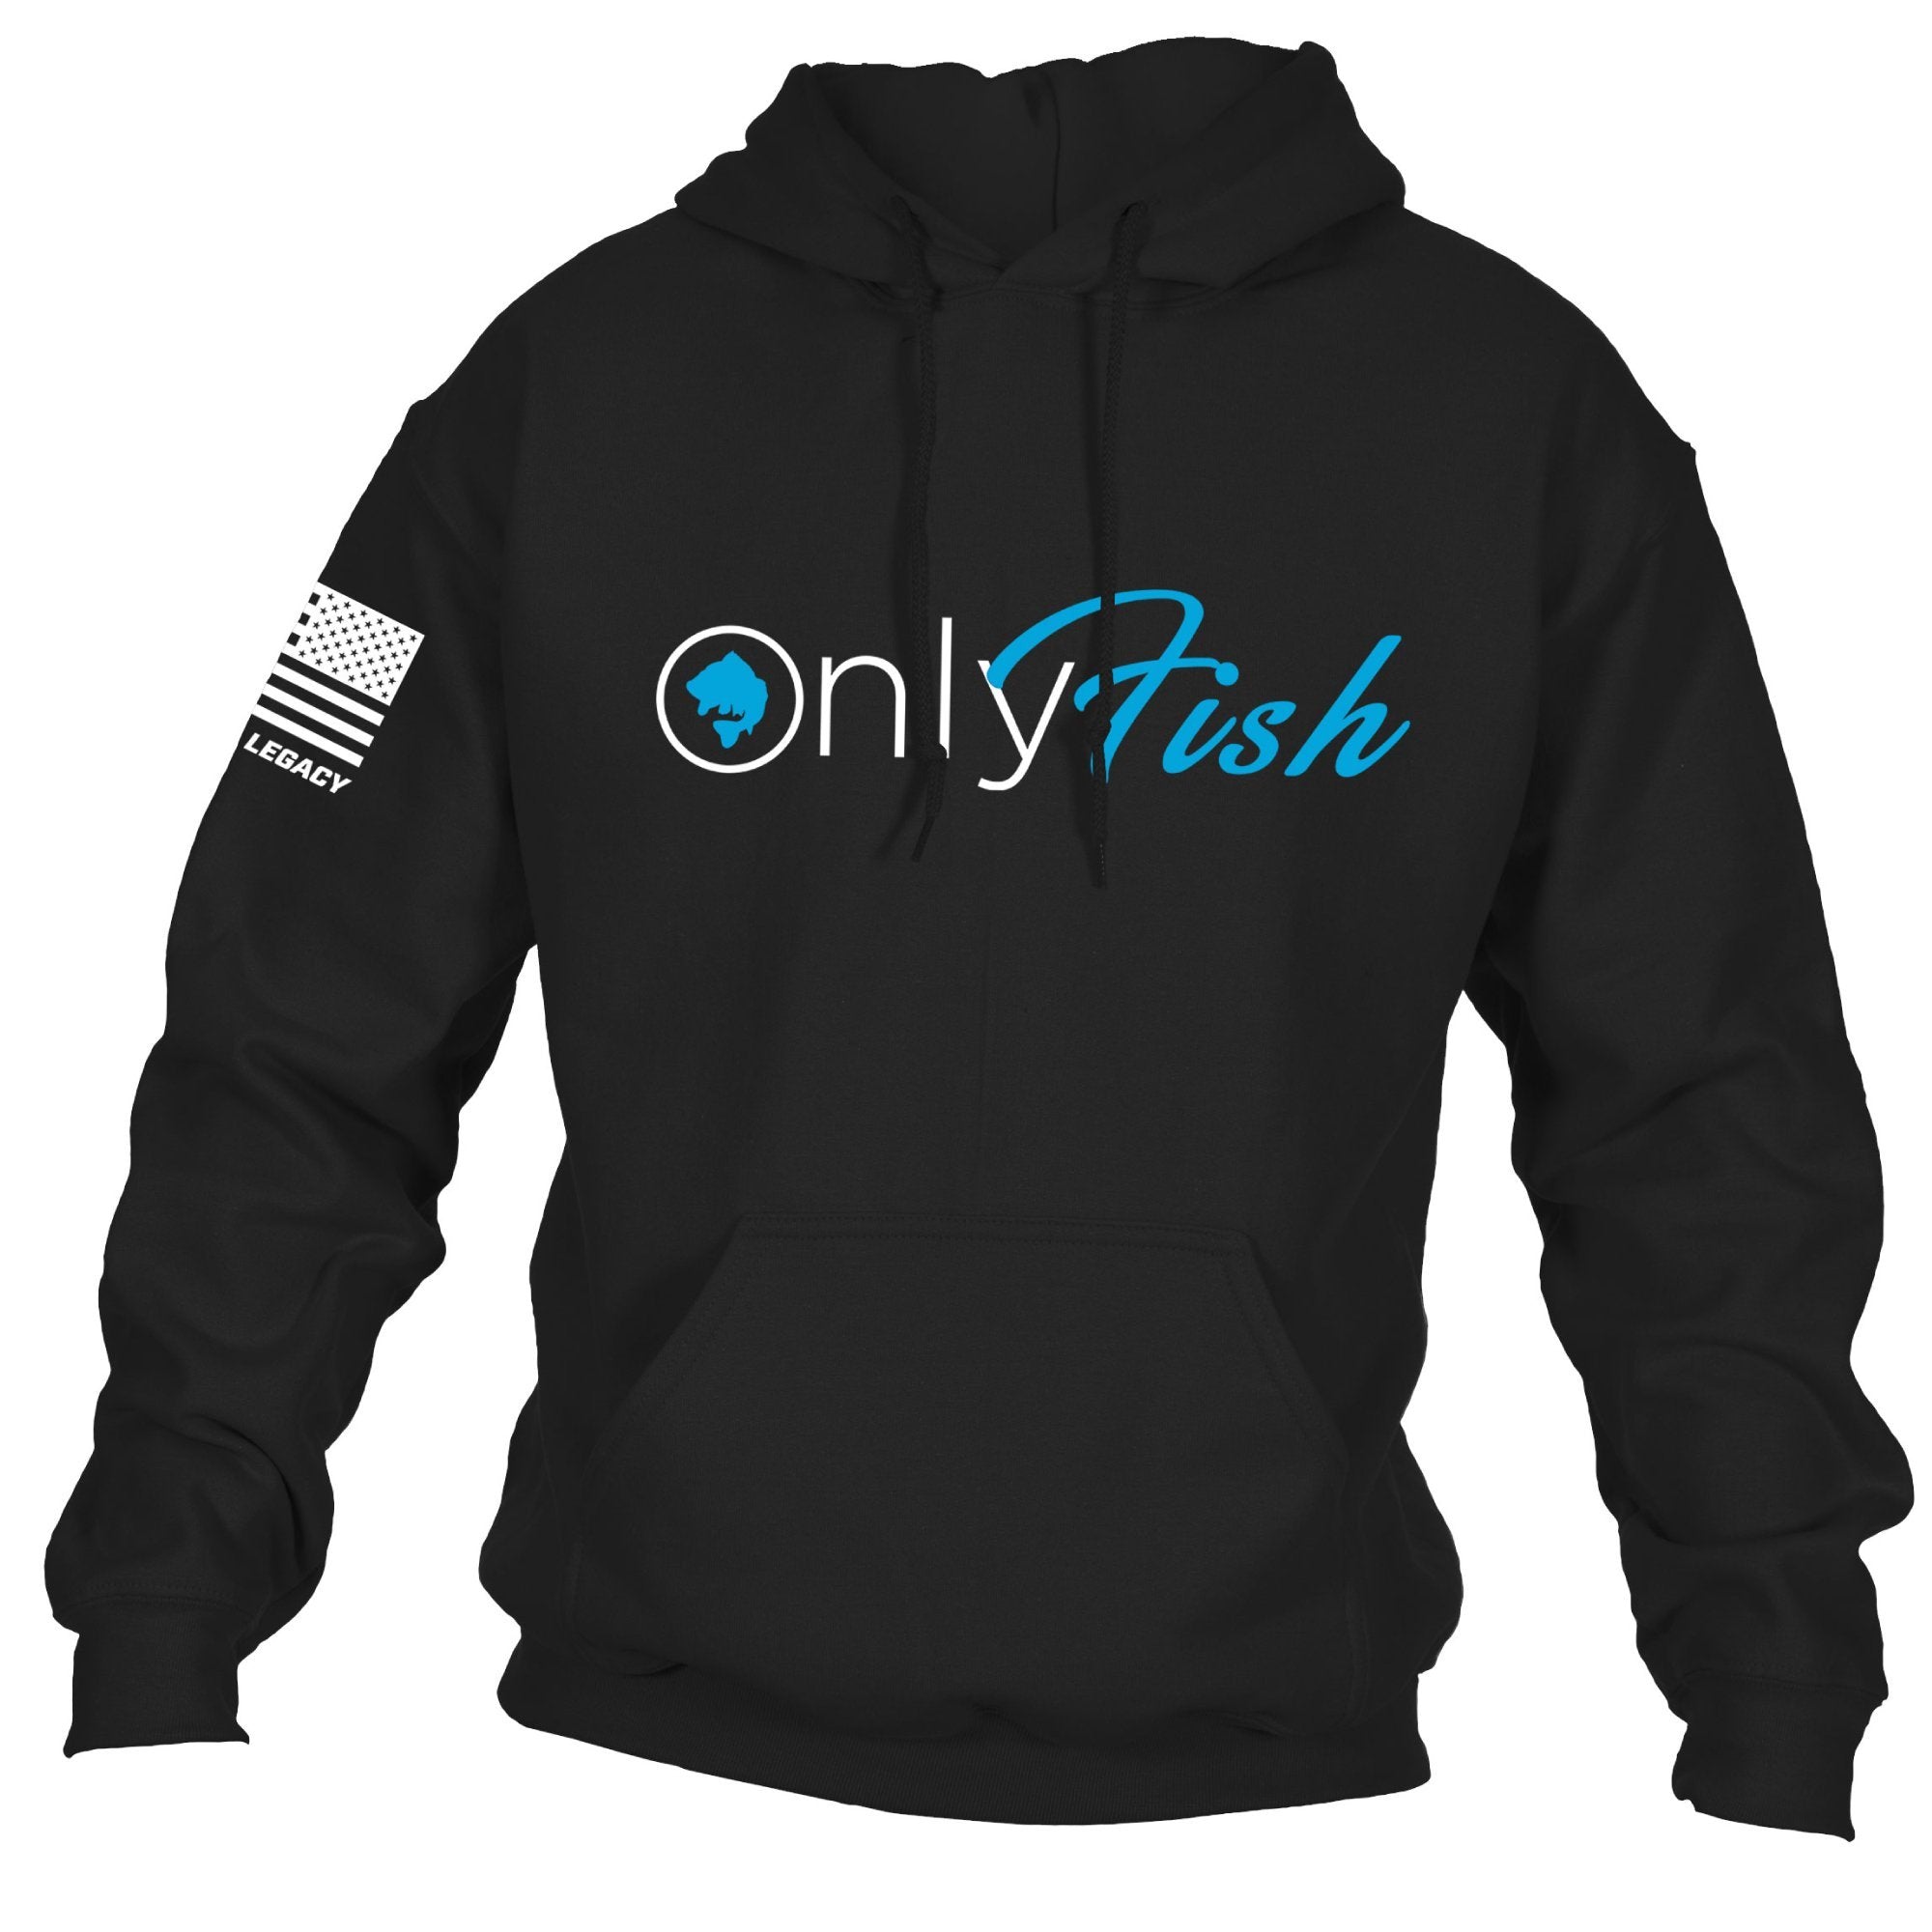 15% Off Our Newest Hoodie - Rugged Legacy